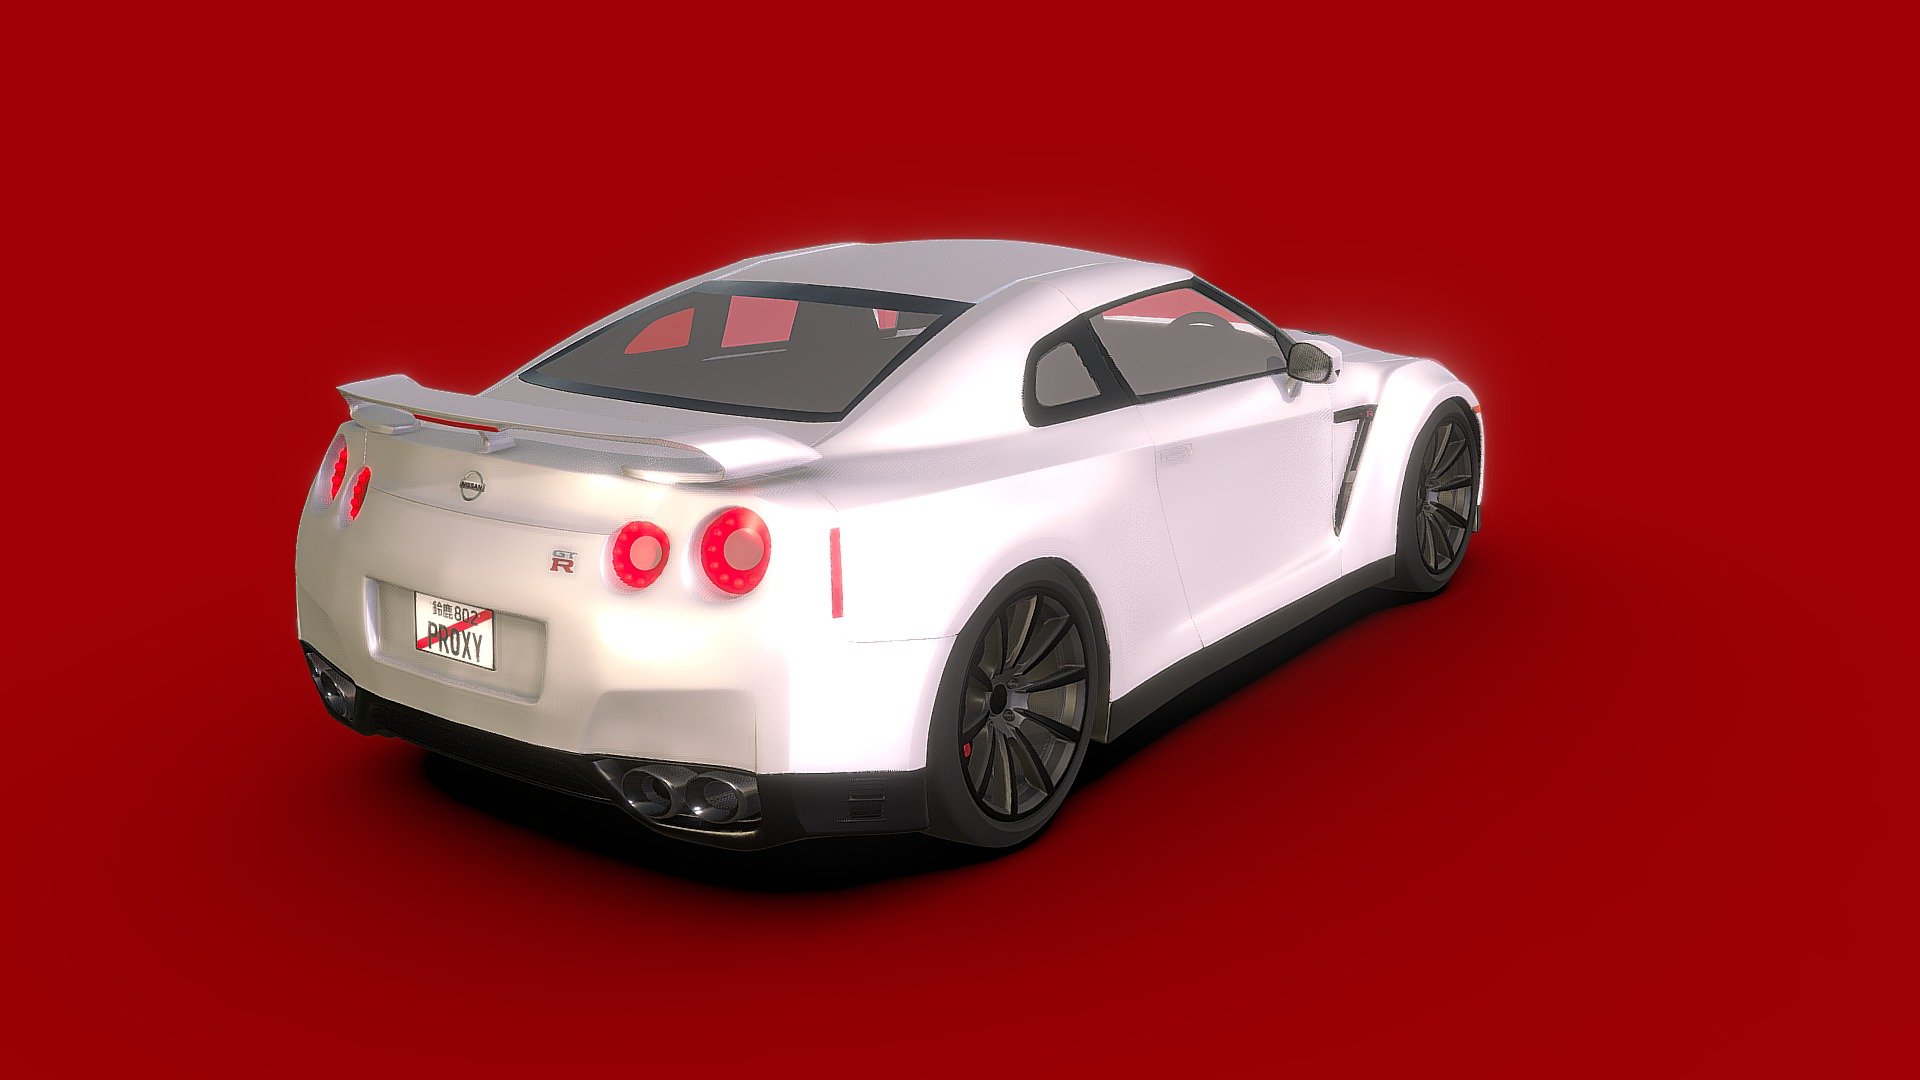 Nissan GT-R R35 (2016)

Probably my favorite car since a long time ago :D

*The Nissan GT-R is a sports car and grand tourer produced by Nissan, unveiled in 2007. It is the successor to the Nissan Skyline GT-R (R34), a high-performance variant of the Nissan Skyline. Although this model was the sixth-generation to bear the GT-R name, it is no longer part of the Skyline line-up. *

This 3D model doesn't have an engine, the interior is made so it is believable from the exterior view 3d model